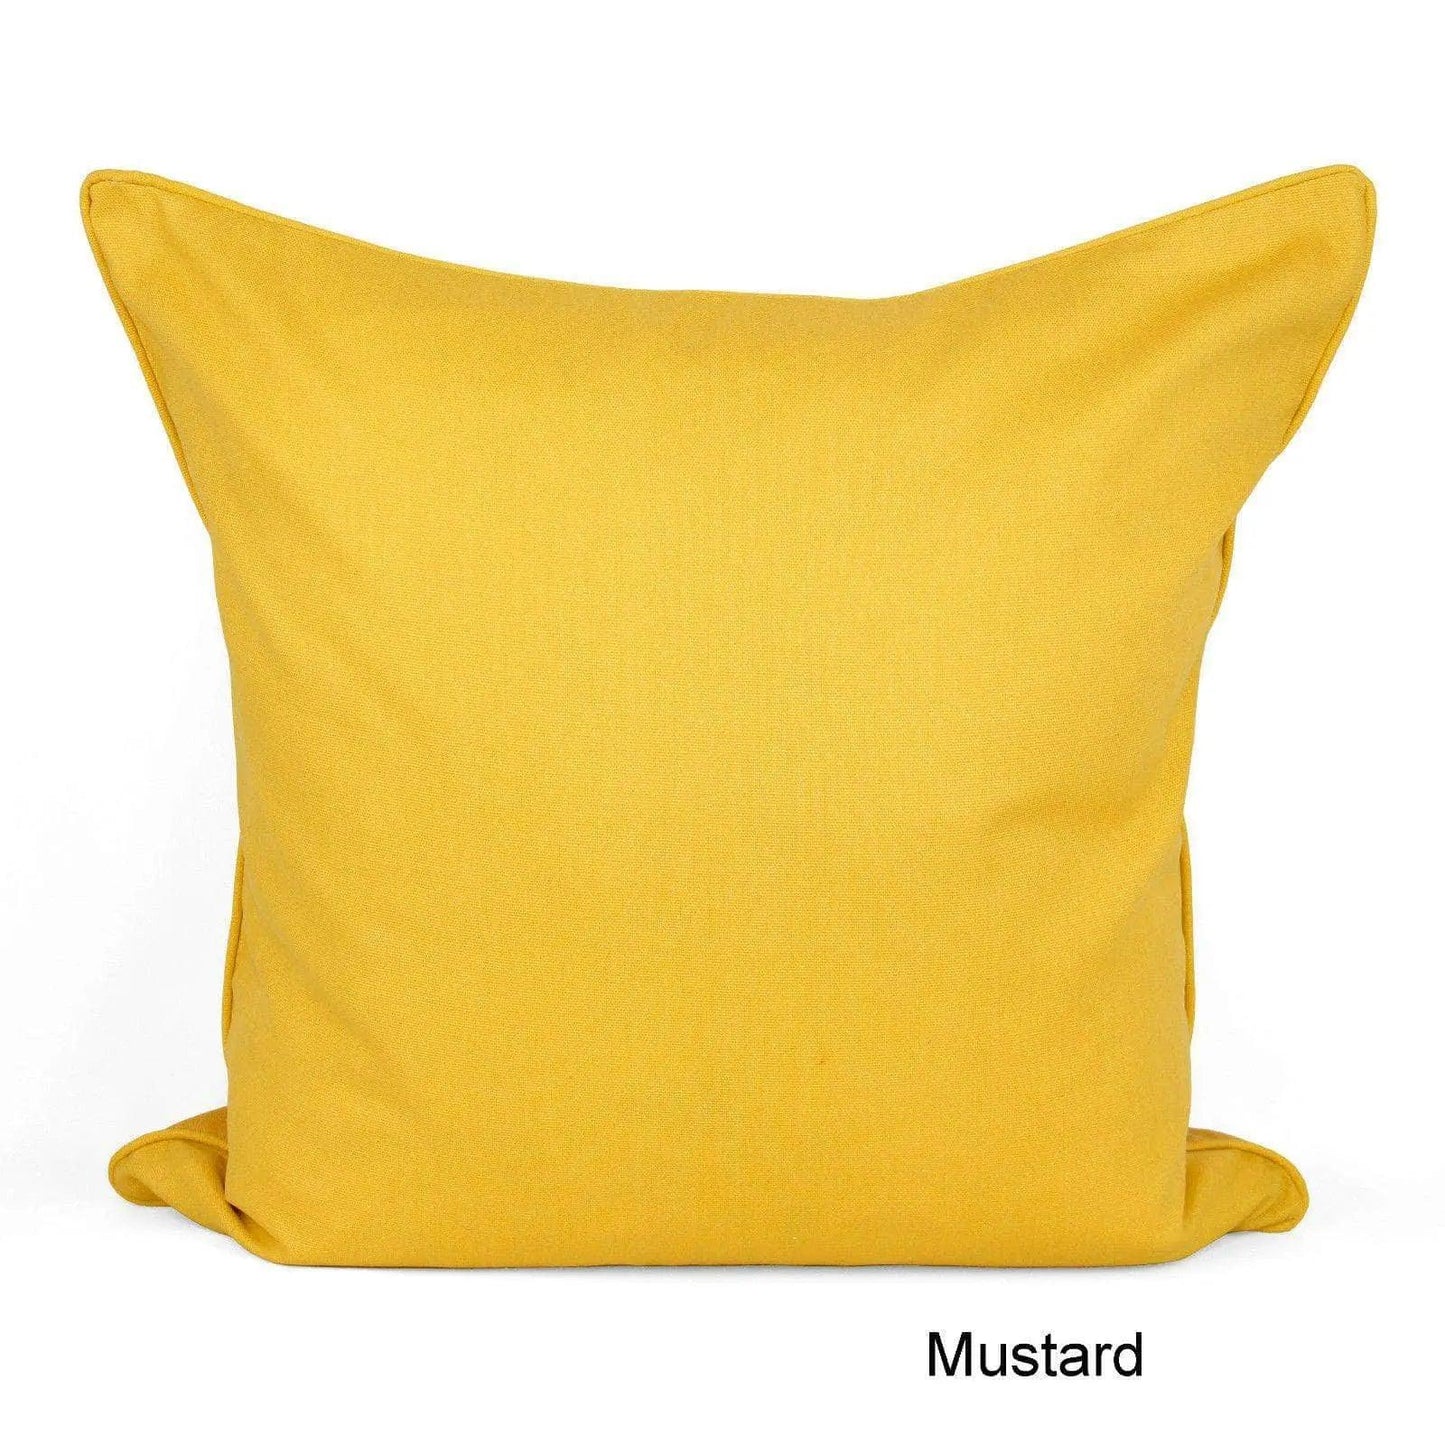 a yellow pillow on a white background